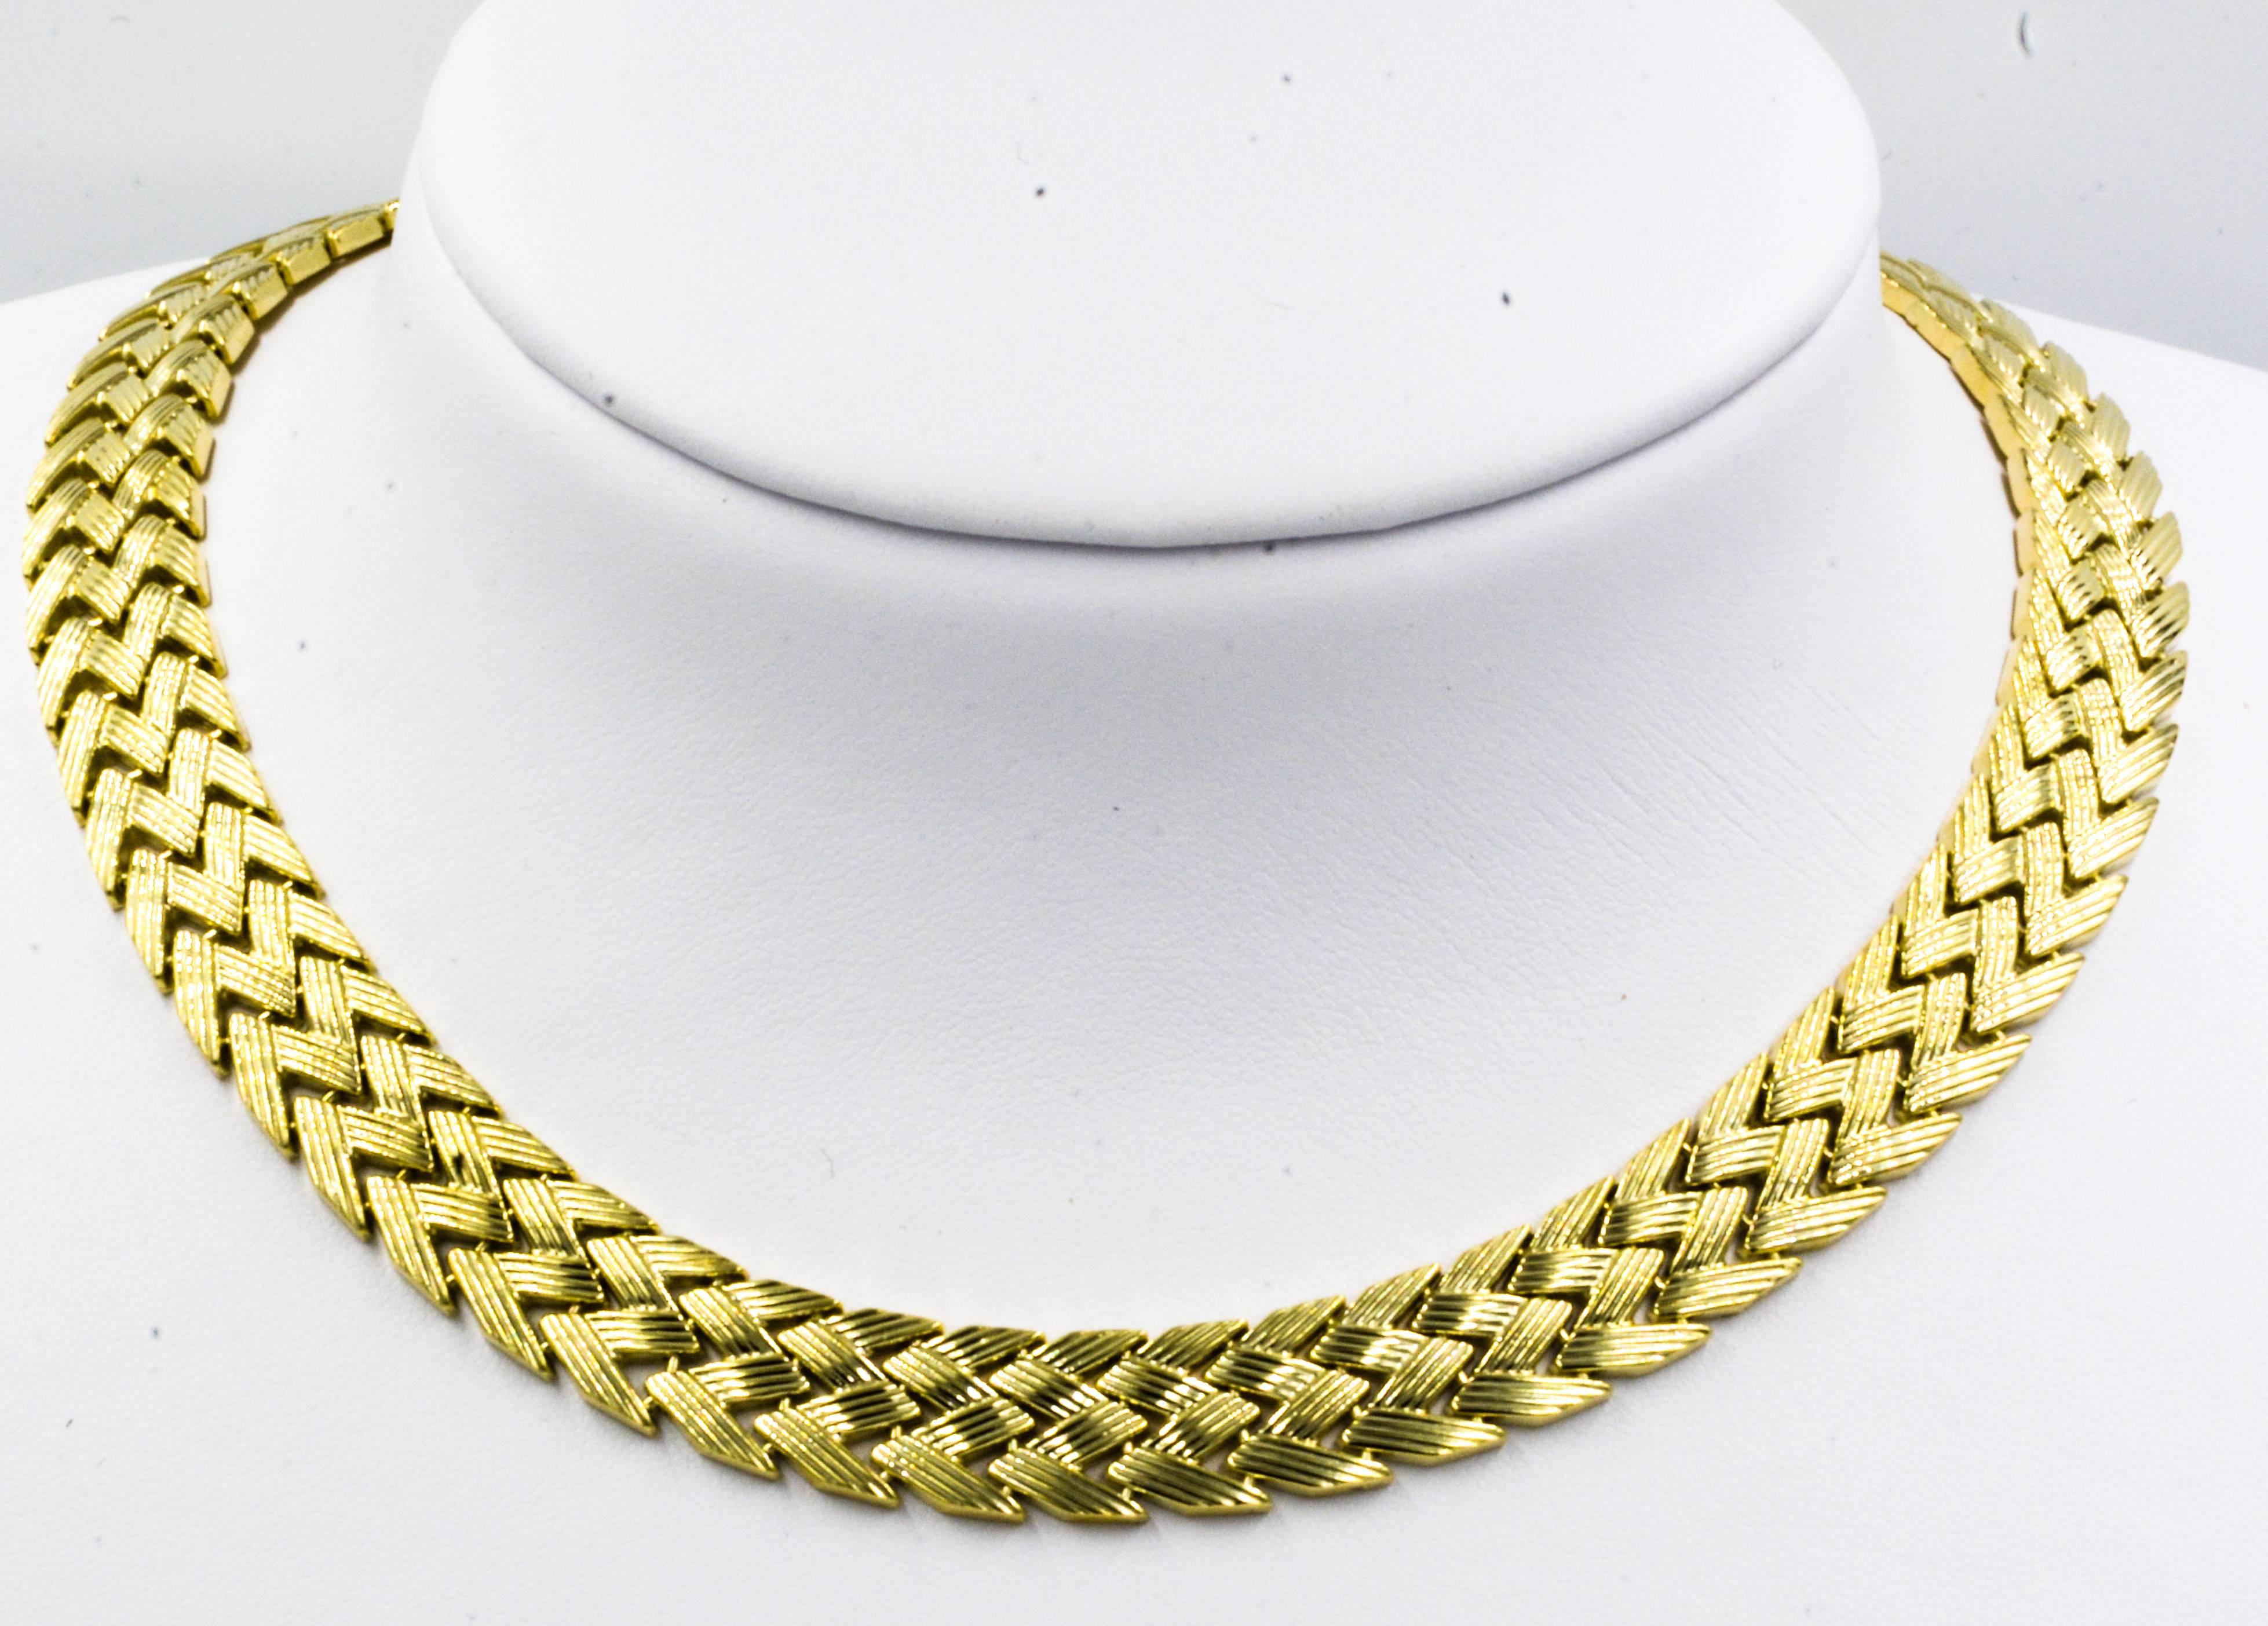 This classic 1970's style bold gold necklace features an attractive zig-zag basket weave pattern. The necklace is supple and comfortable, measuring in at 17 inches long and 1/2 inch wide.